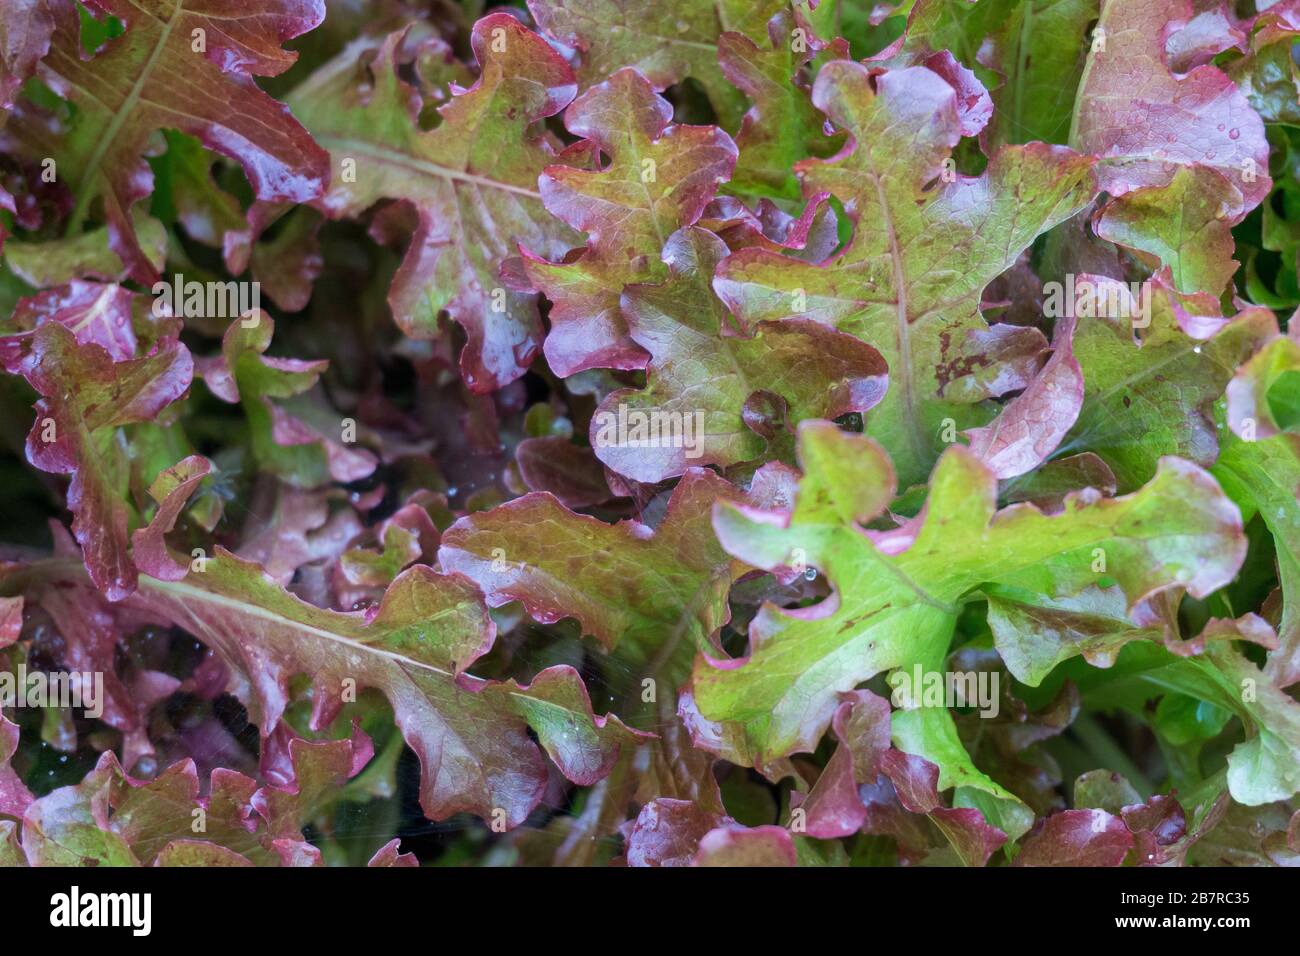 Closeup shot of red and green liverwort plants Stock Photo